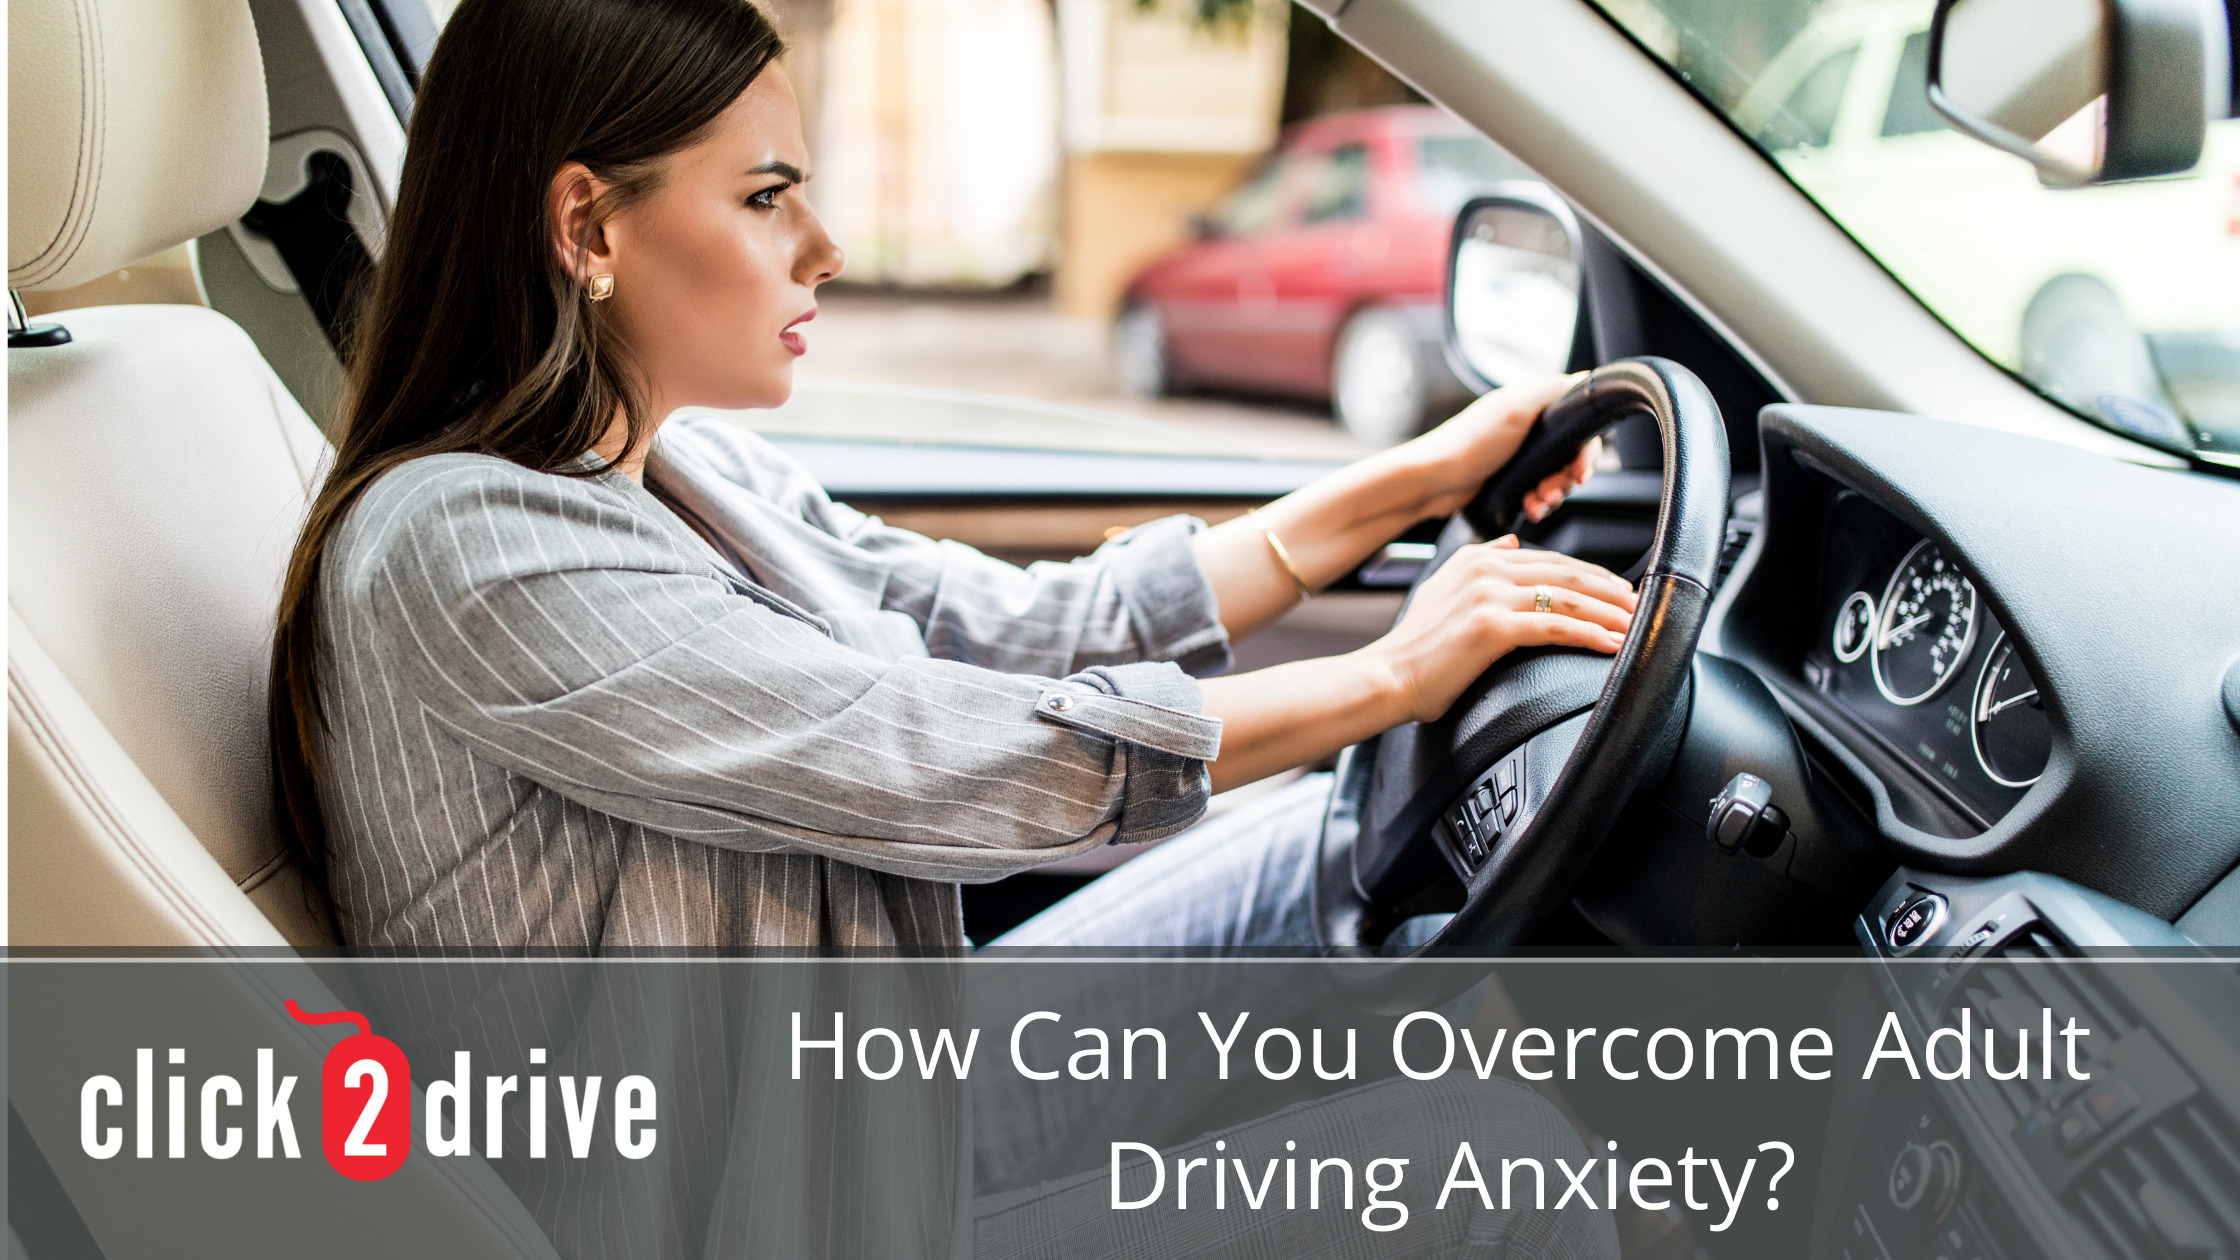 How Can You Overcome Adult Driving Anxiety?